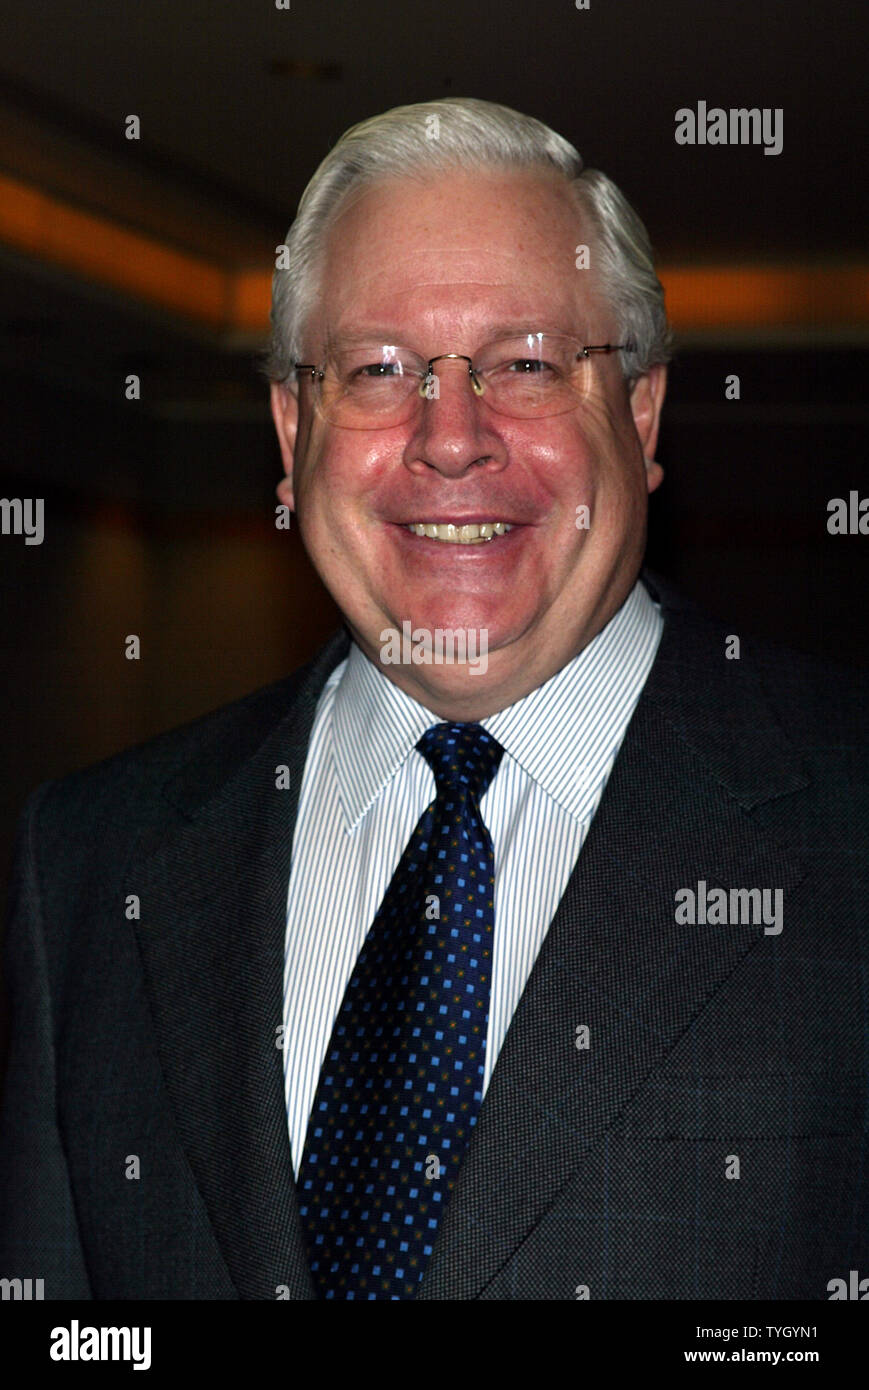 Mr. C. Robert Henrikson, President and COO of MetLife, Inc. attends the 17th Annual Lewis Hine Awards Ceremony on January 31, 2005 in New York, after his  company announced  that they will acquire Travelers Life and Annuity from Citigroup Inc. for $11.5 billion dollars in cash and stock in a deal that will make the company the largest individual life insurer in North America.  The deal should be finalized by the summer..  (UPI Photo/Laura Cavanaugh) Stock Photo